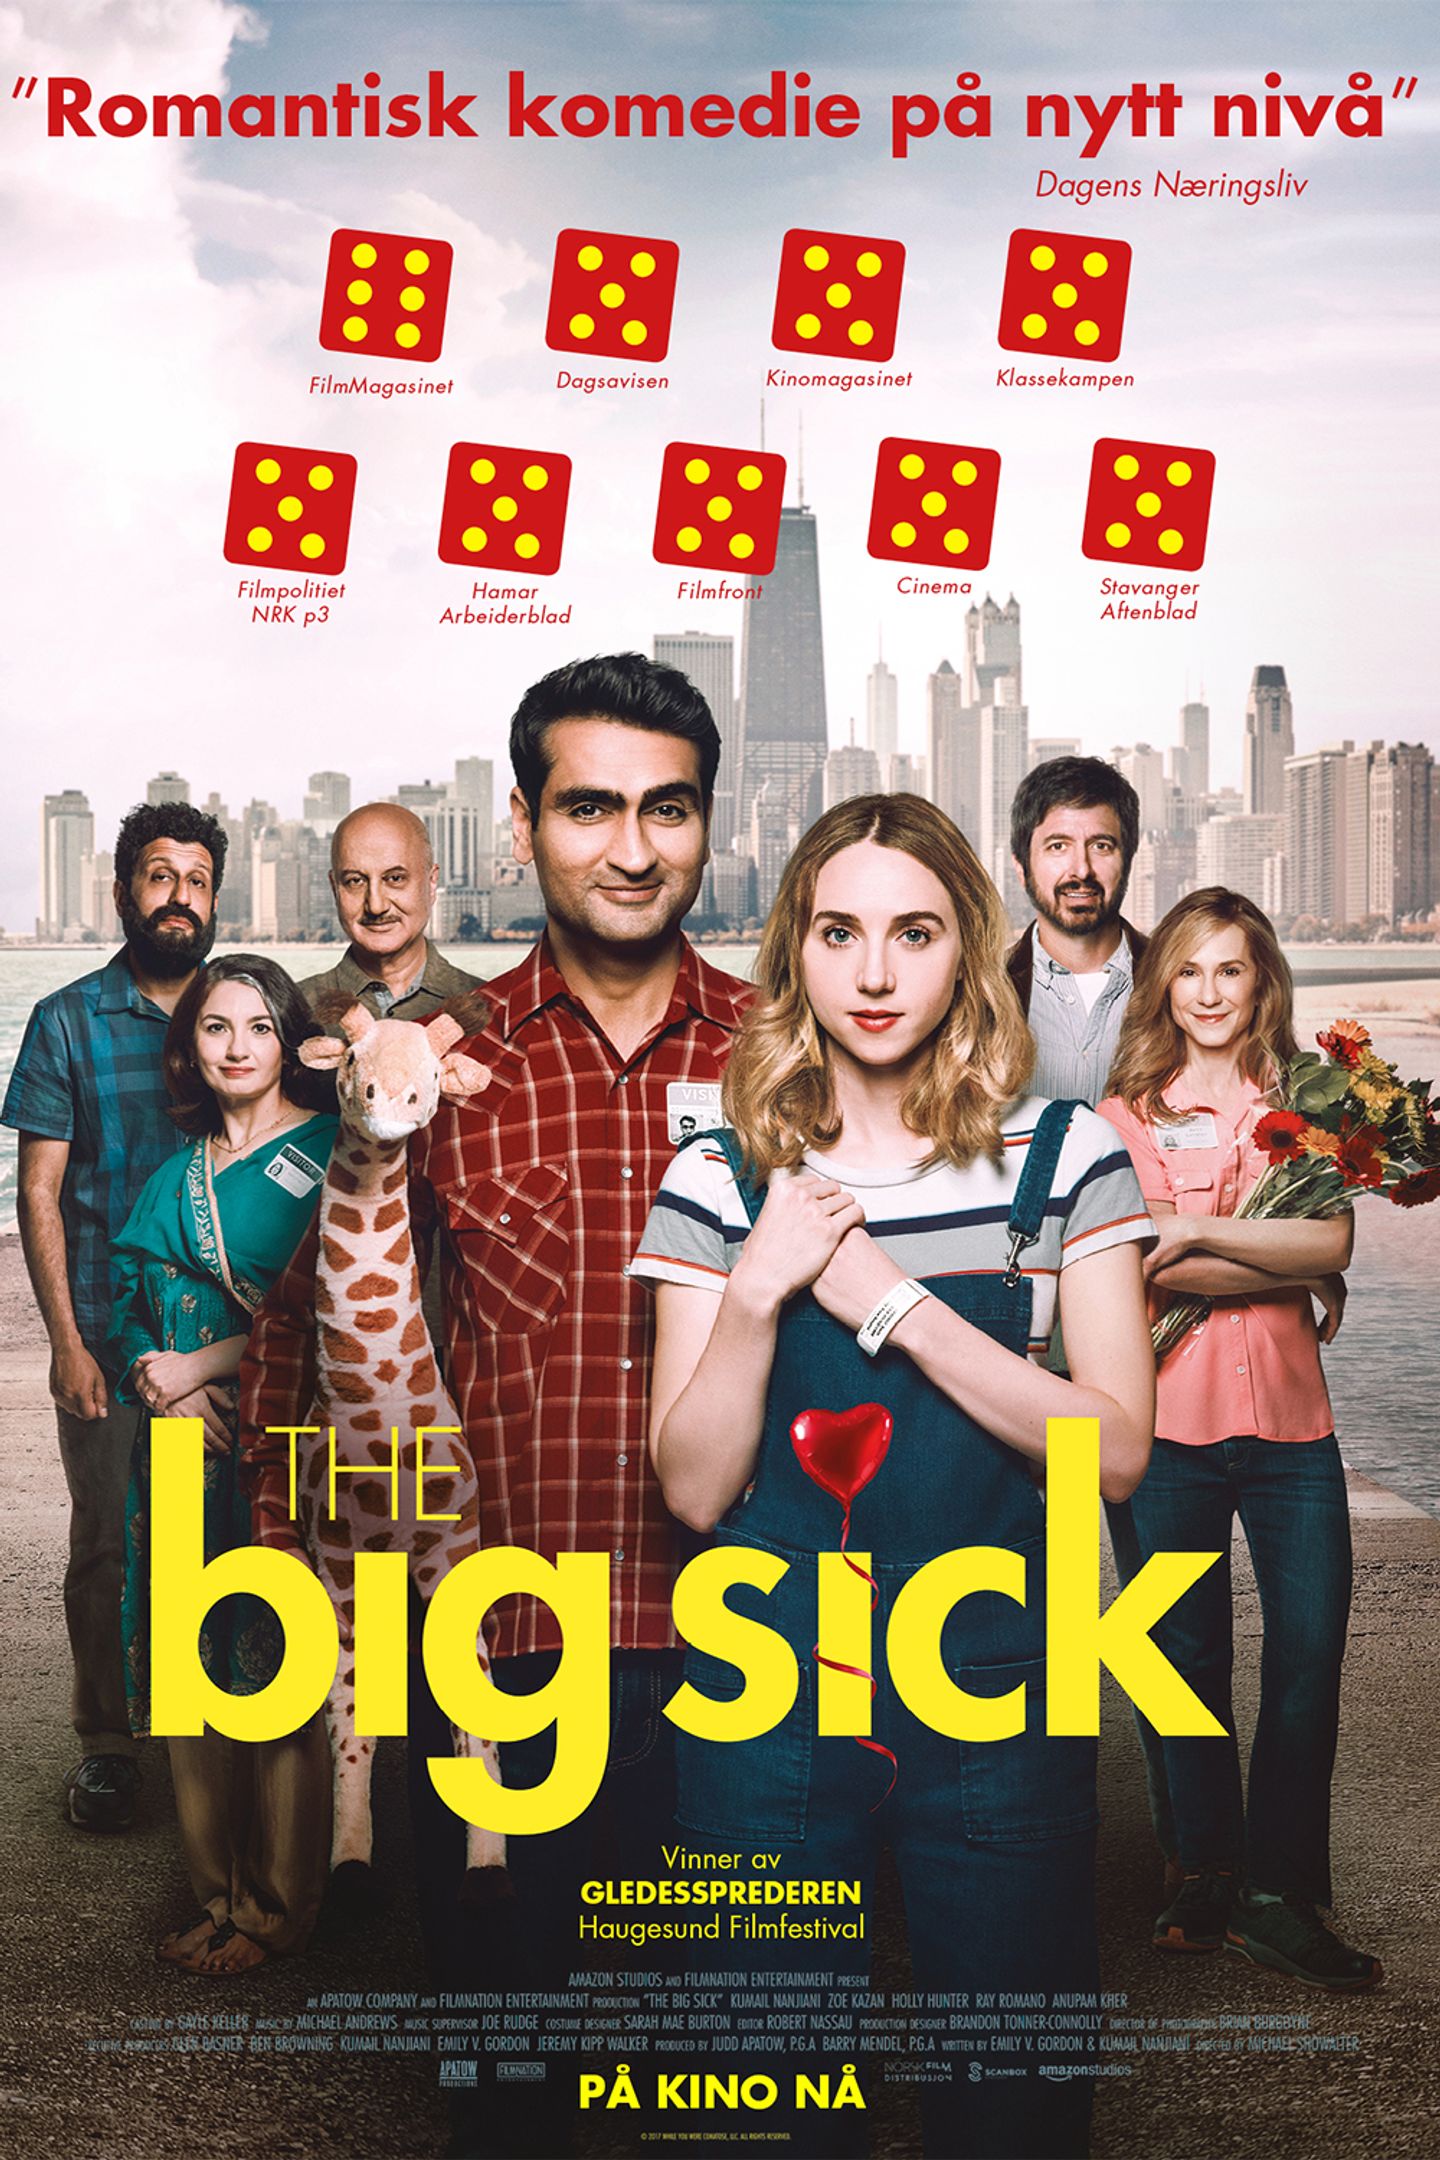 Plakat for 'The Big Sick'